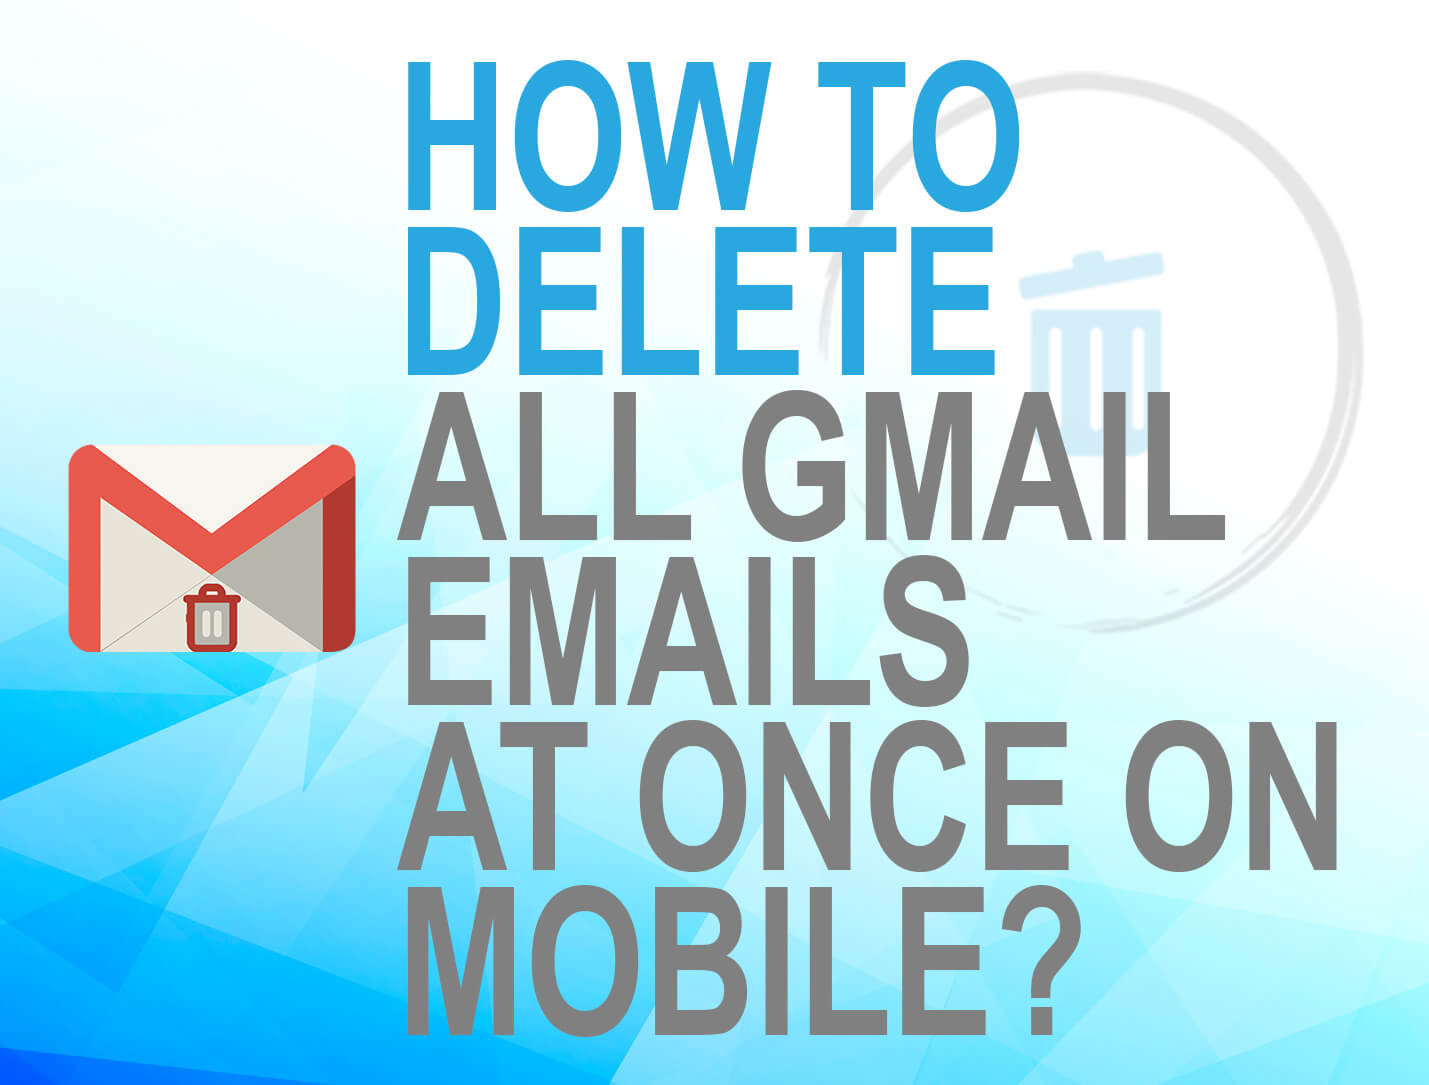 How to Delete all Gmail emails at once on Mobile? (Android/iOS)